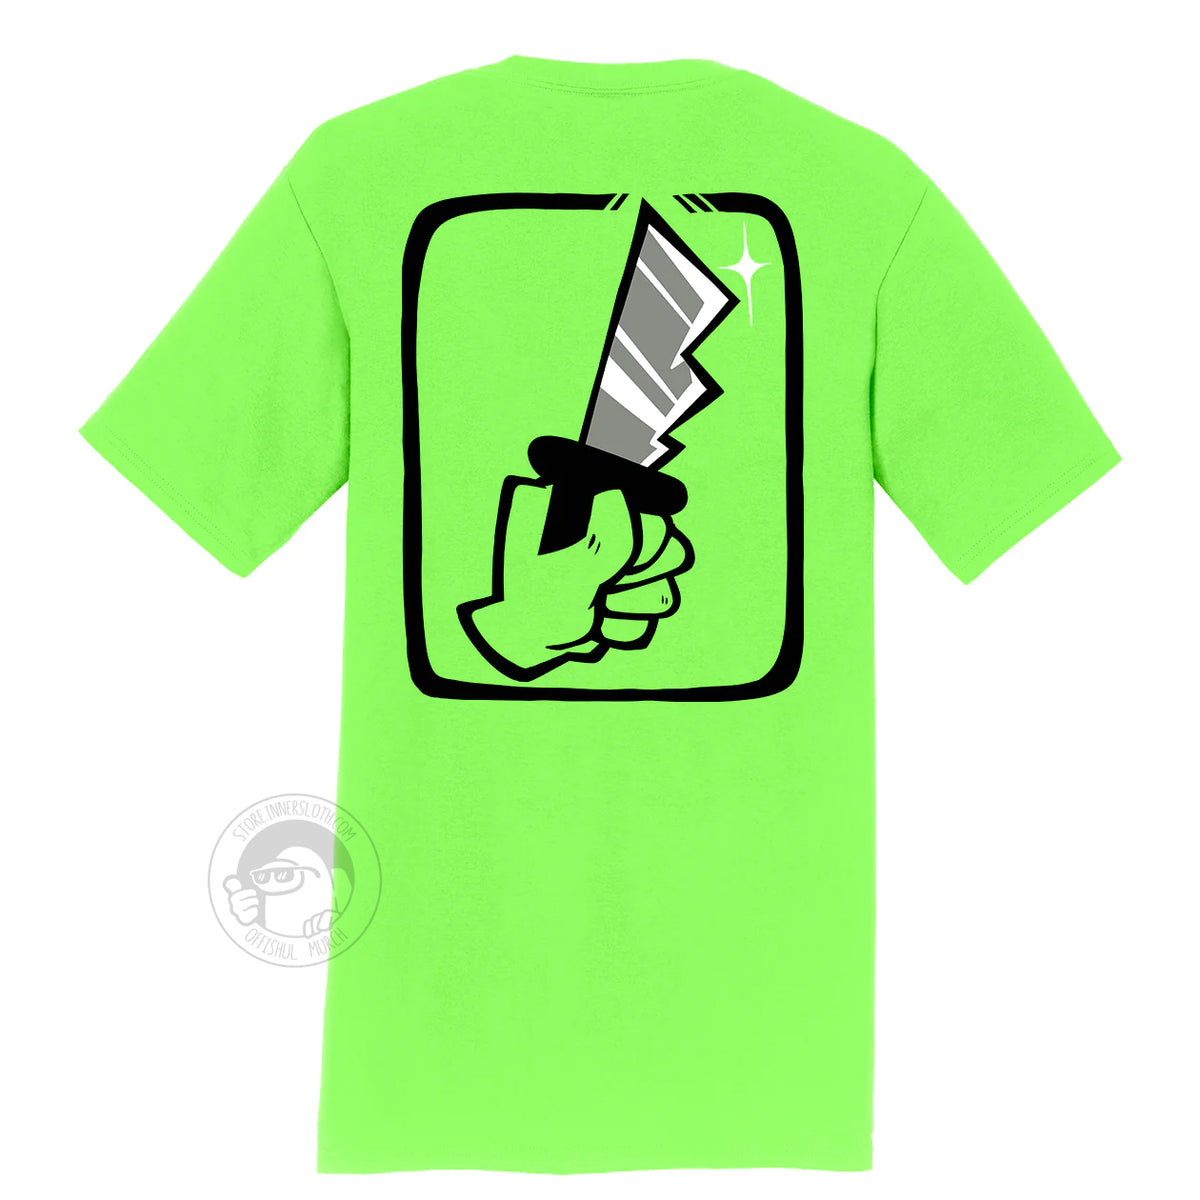 A product photo of the back of the Among Us: Shhhirt in lime green. The back art is a large hand holding a knife.